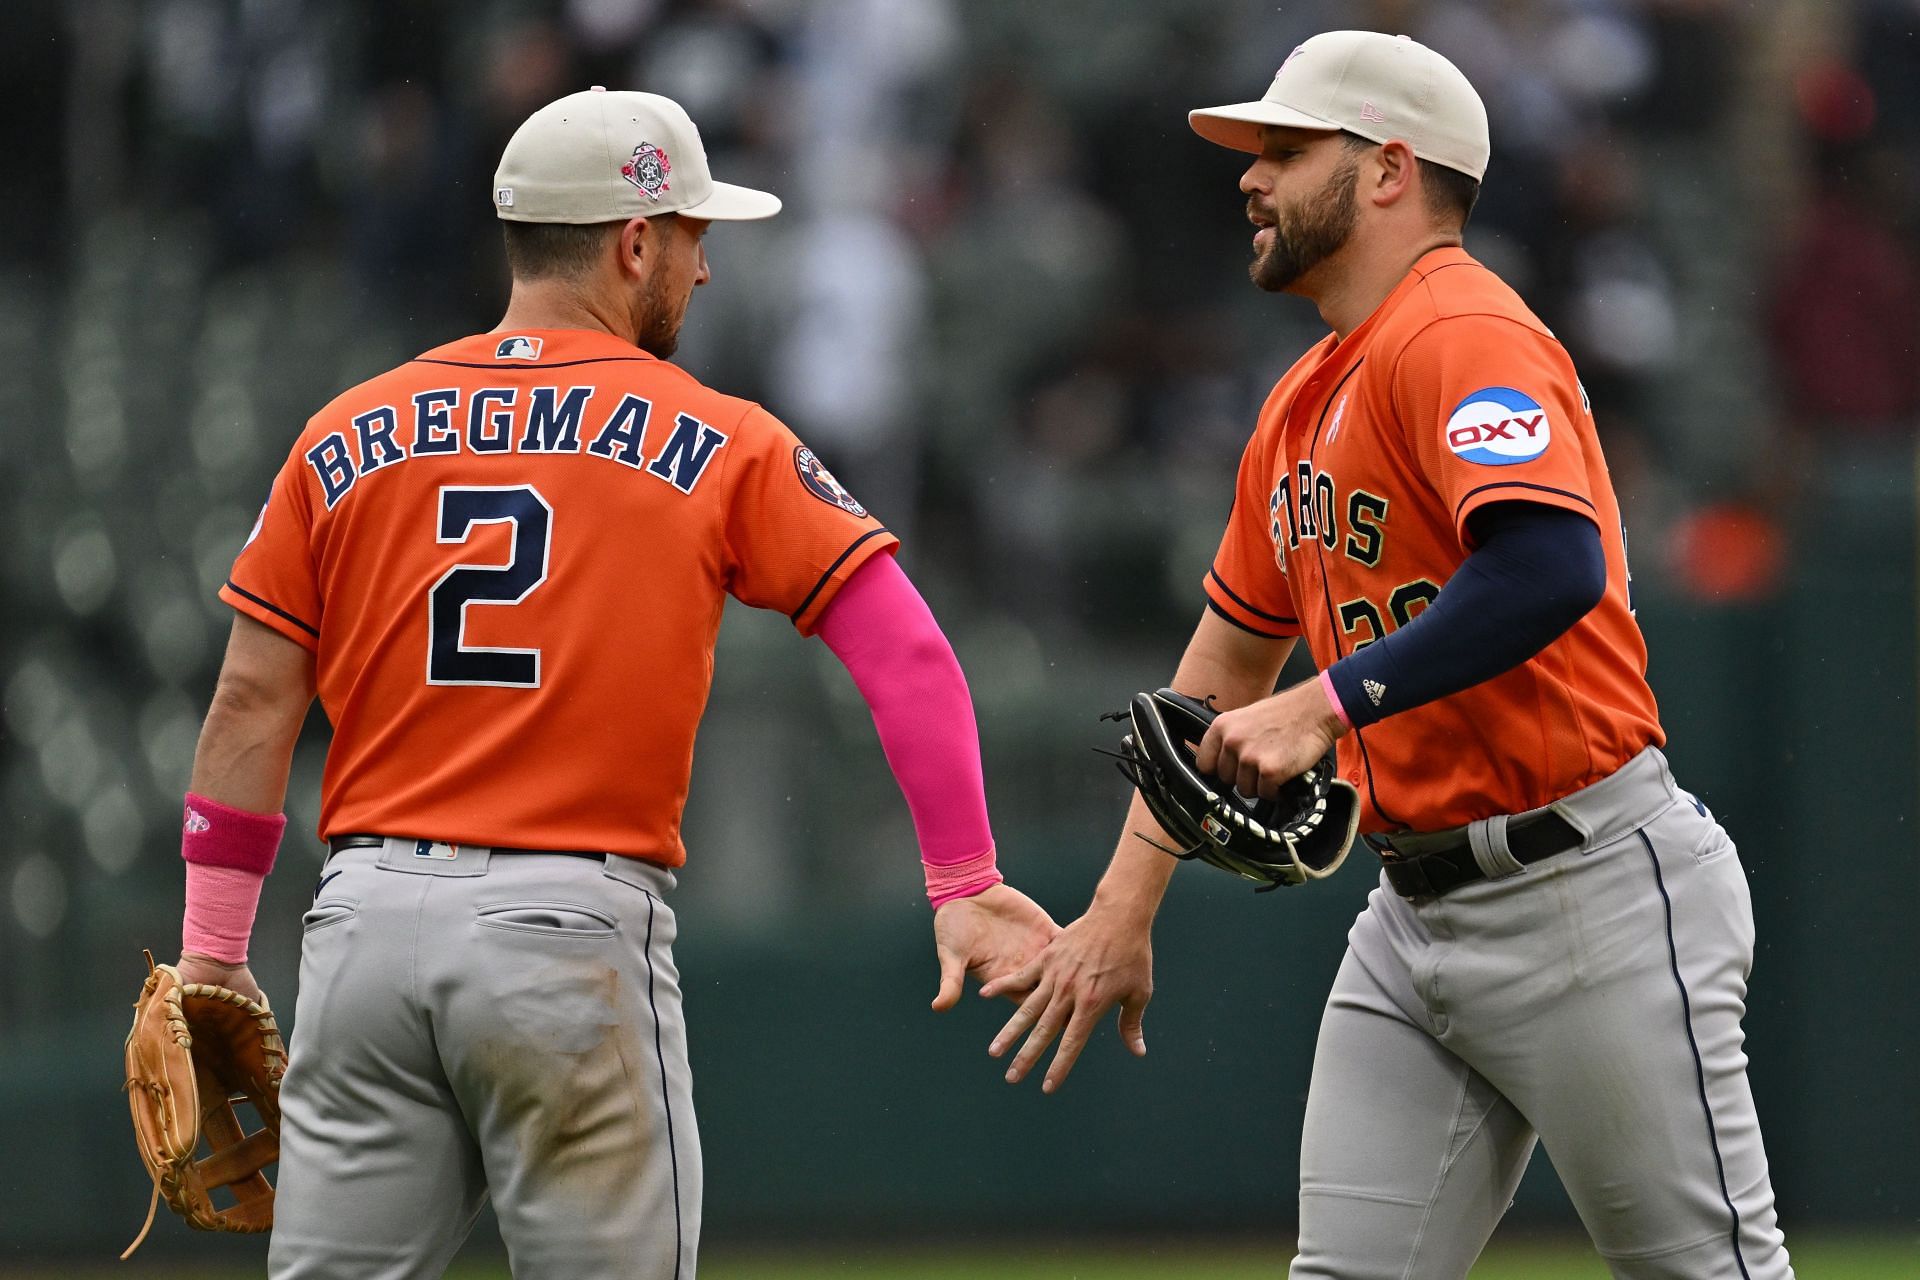 Houston Astros: Chas McCormick earns AL player of the week after 3